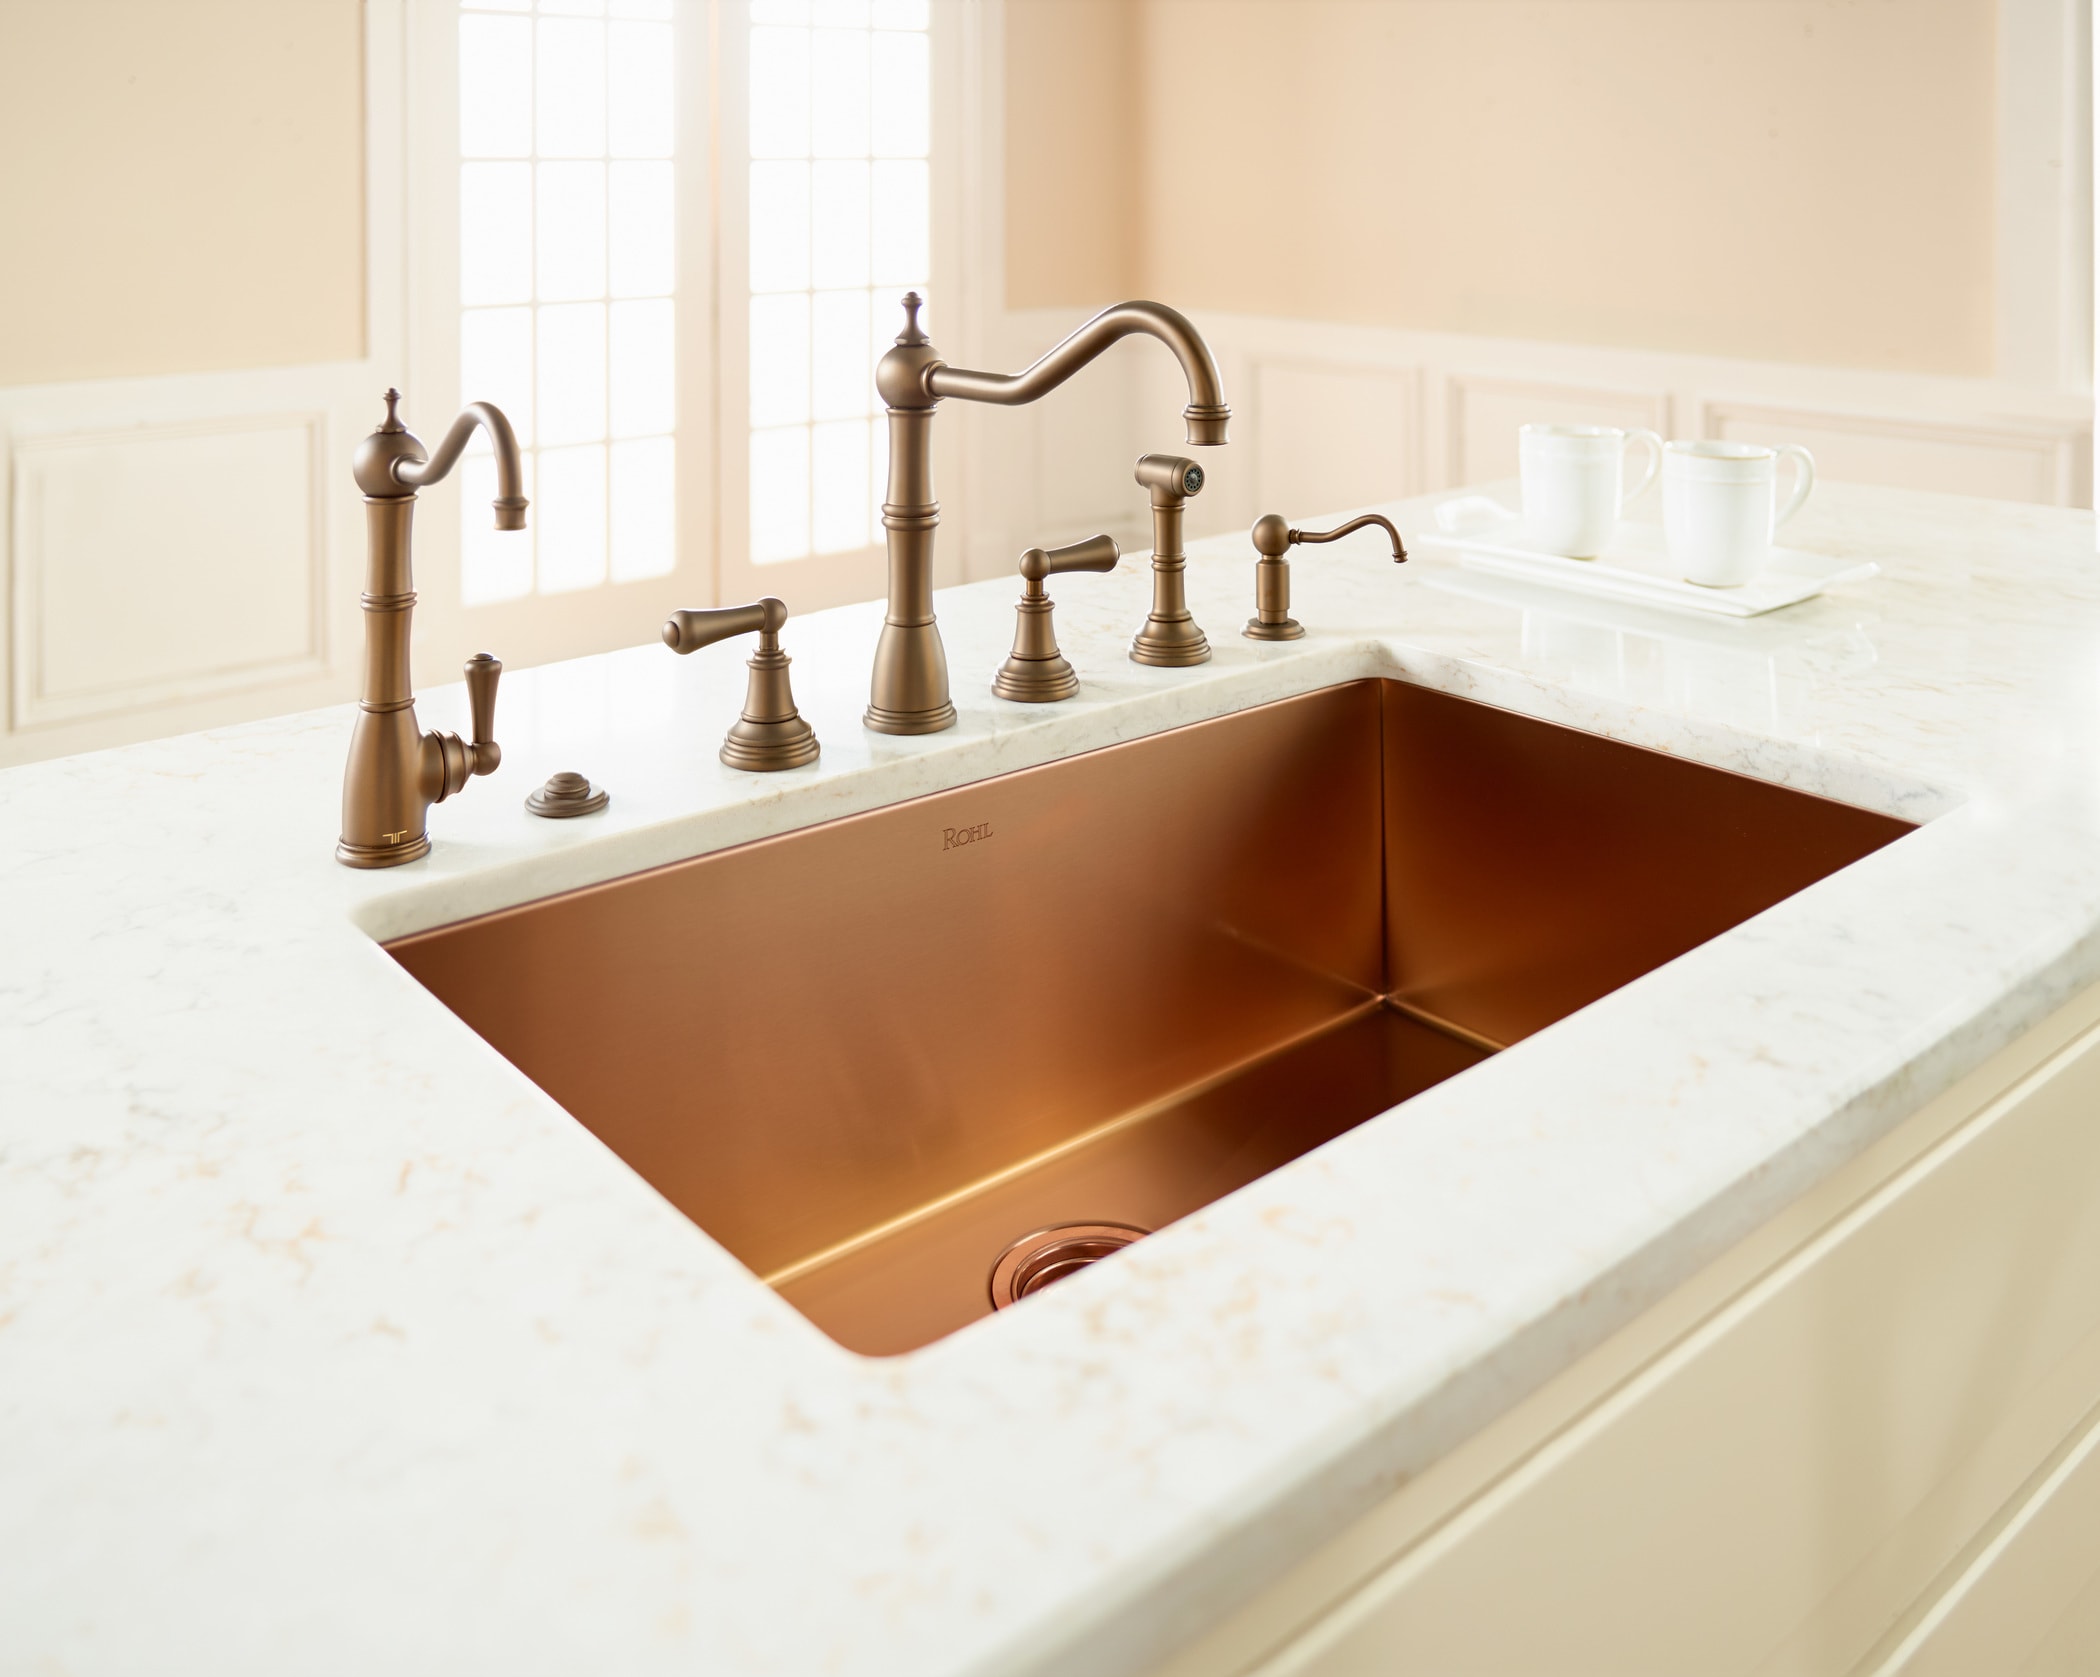 Rohl Rss3018 Forze 31 1 2 Single Bowl